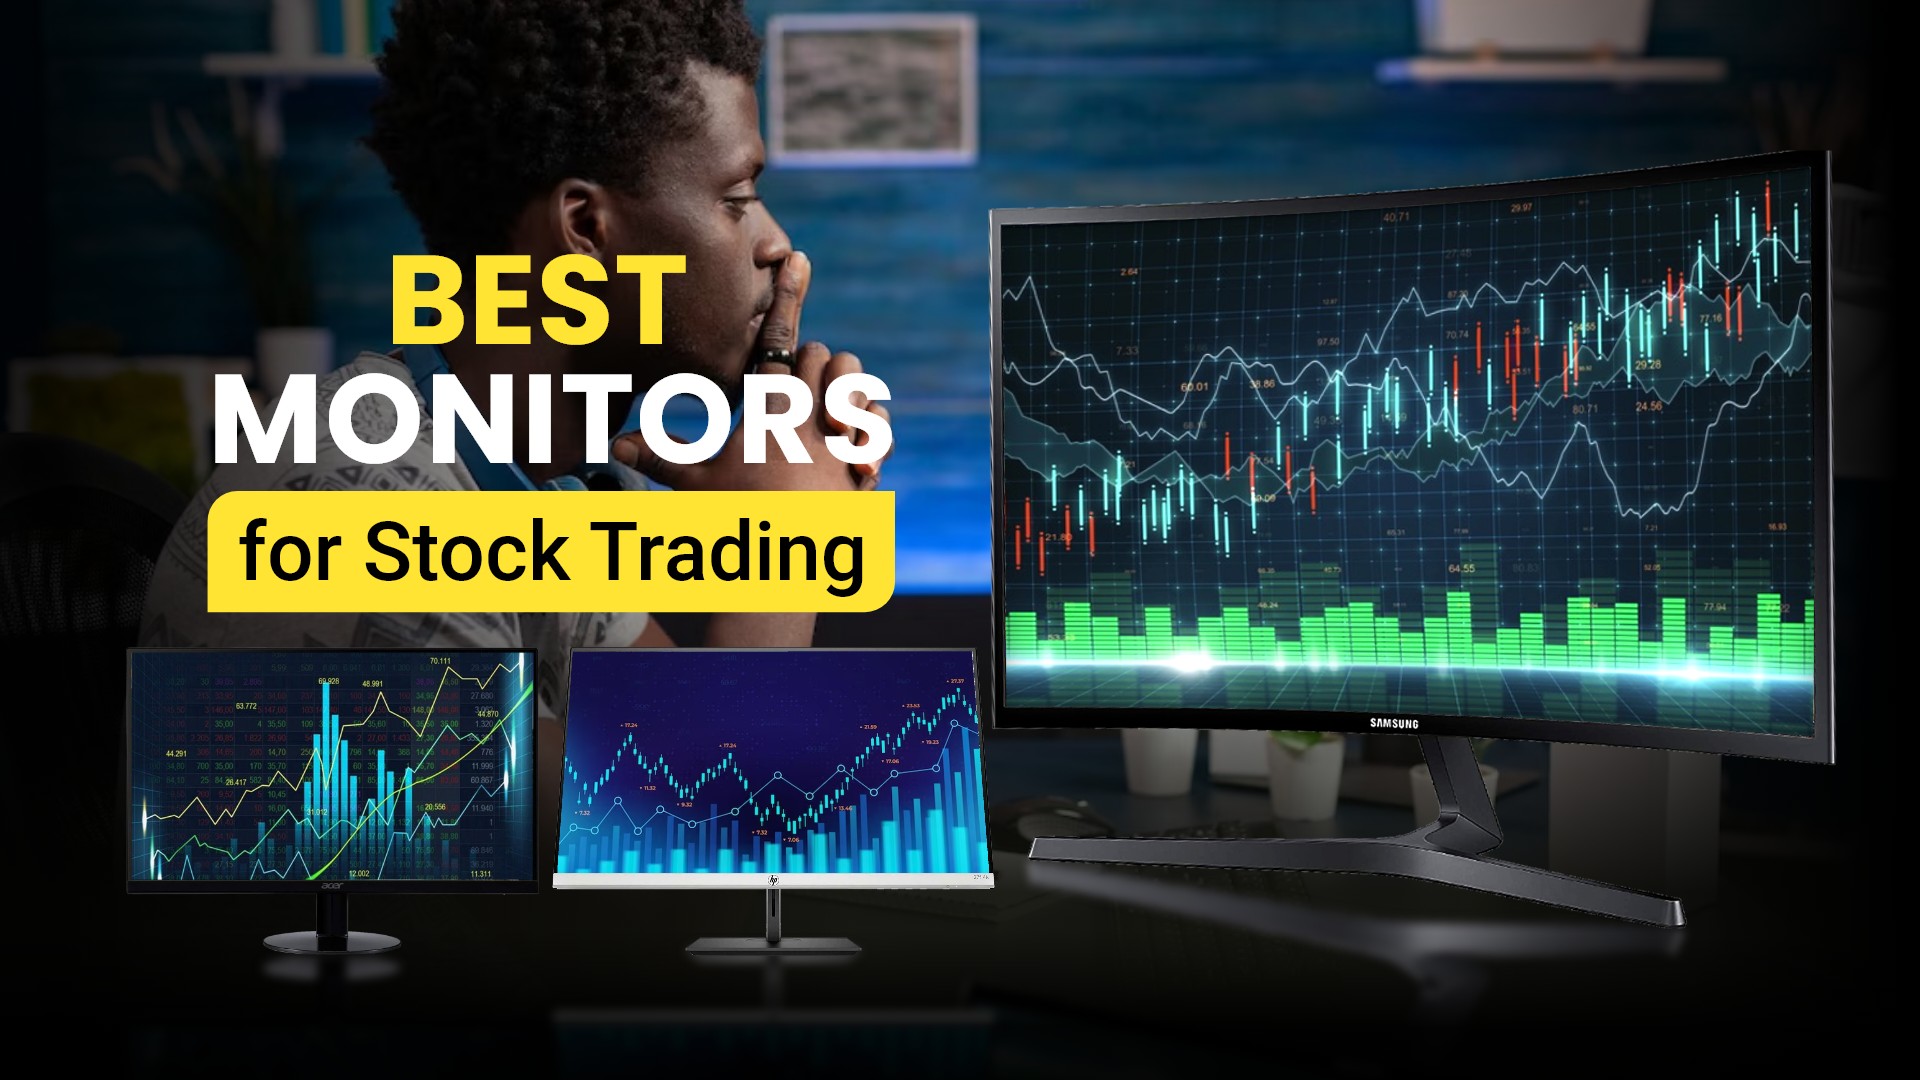 11 Best Monitor for Stock Trading